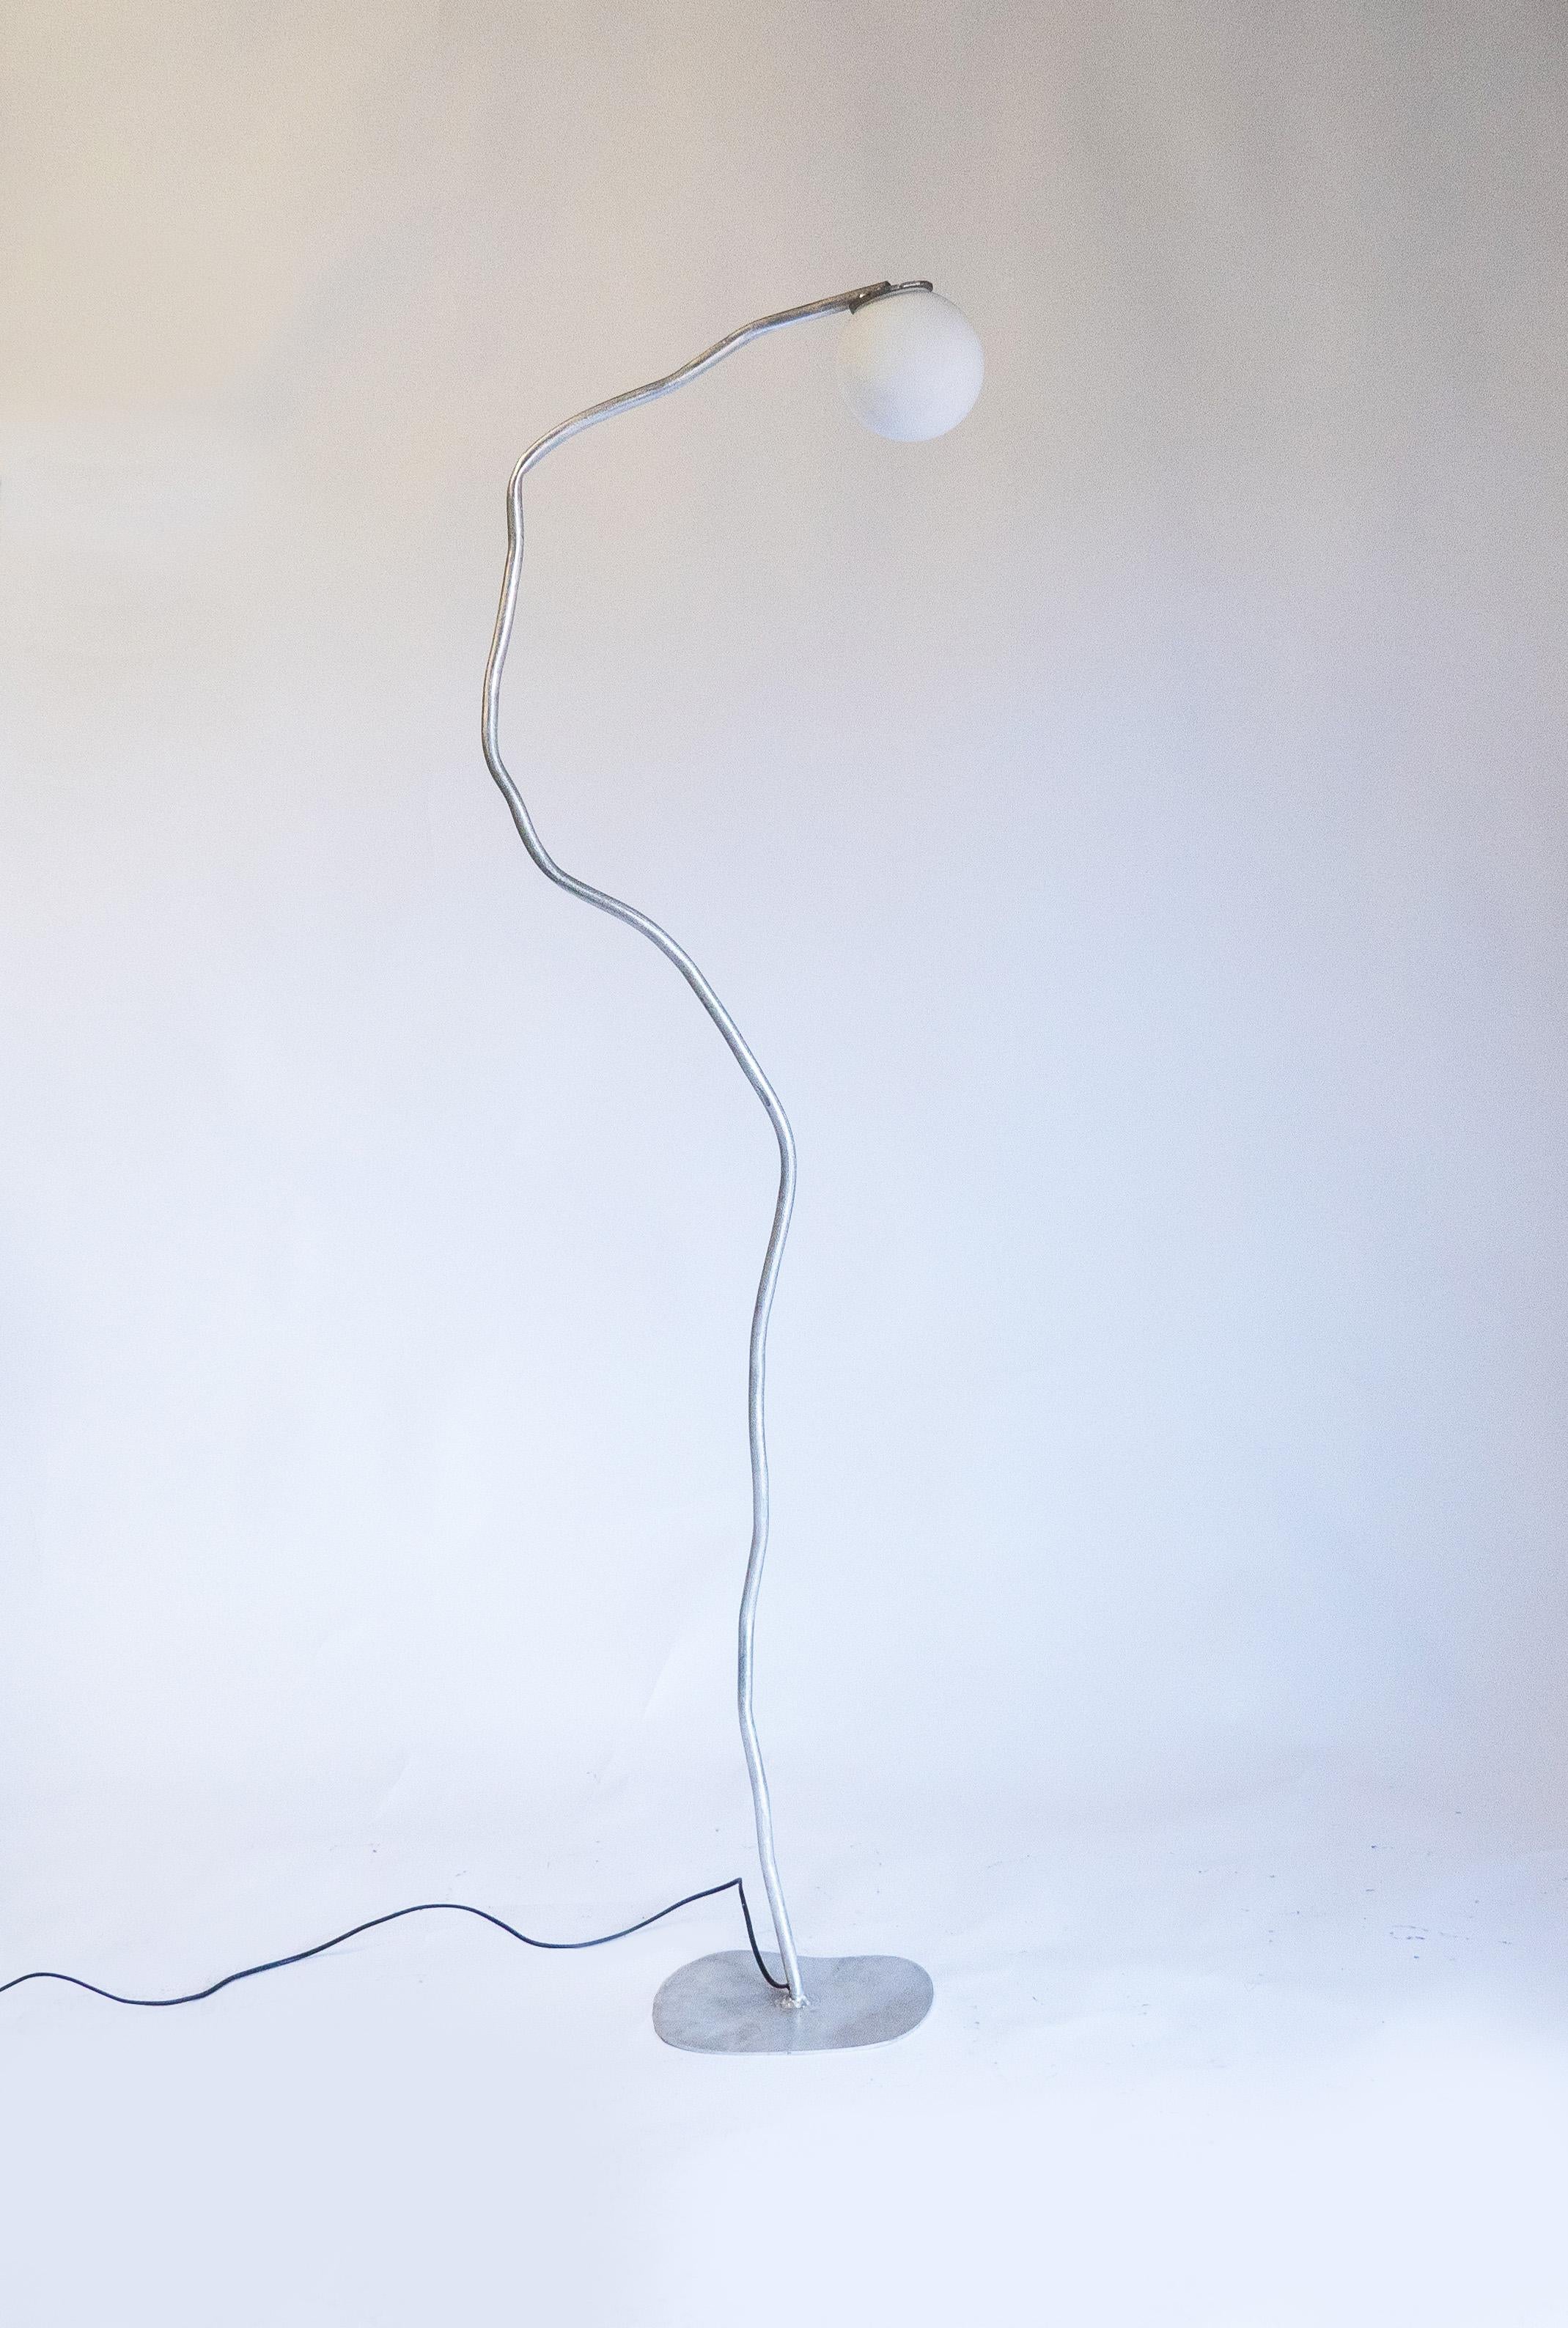 Hand-Crafted Organic Lamp By Joseph Ellwood for Six Dots Design For Sale